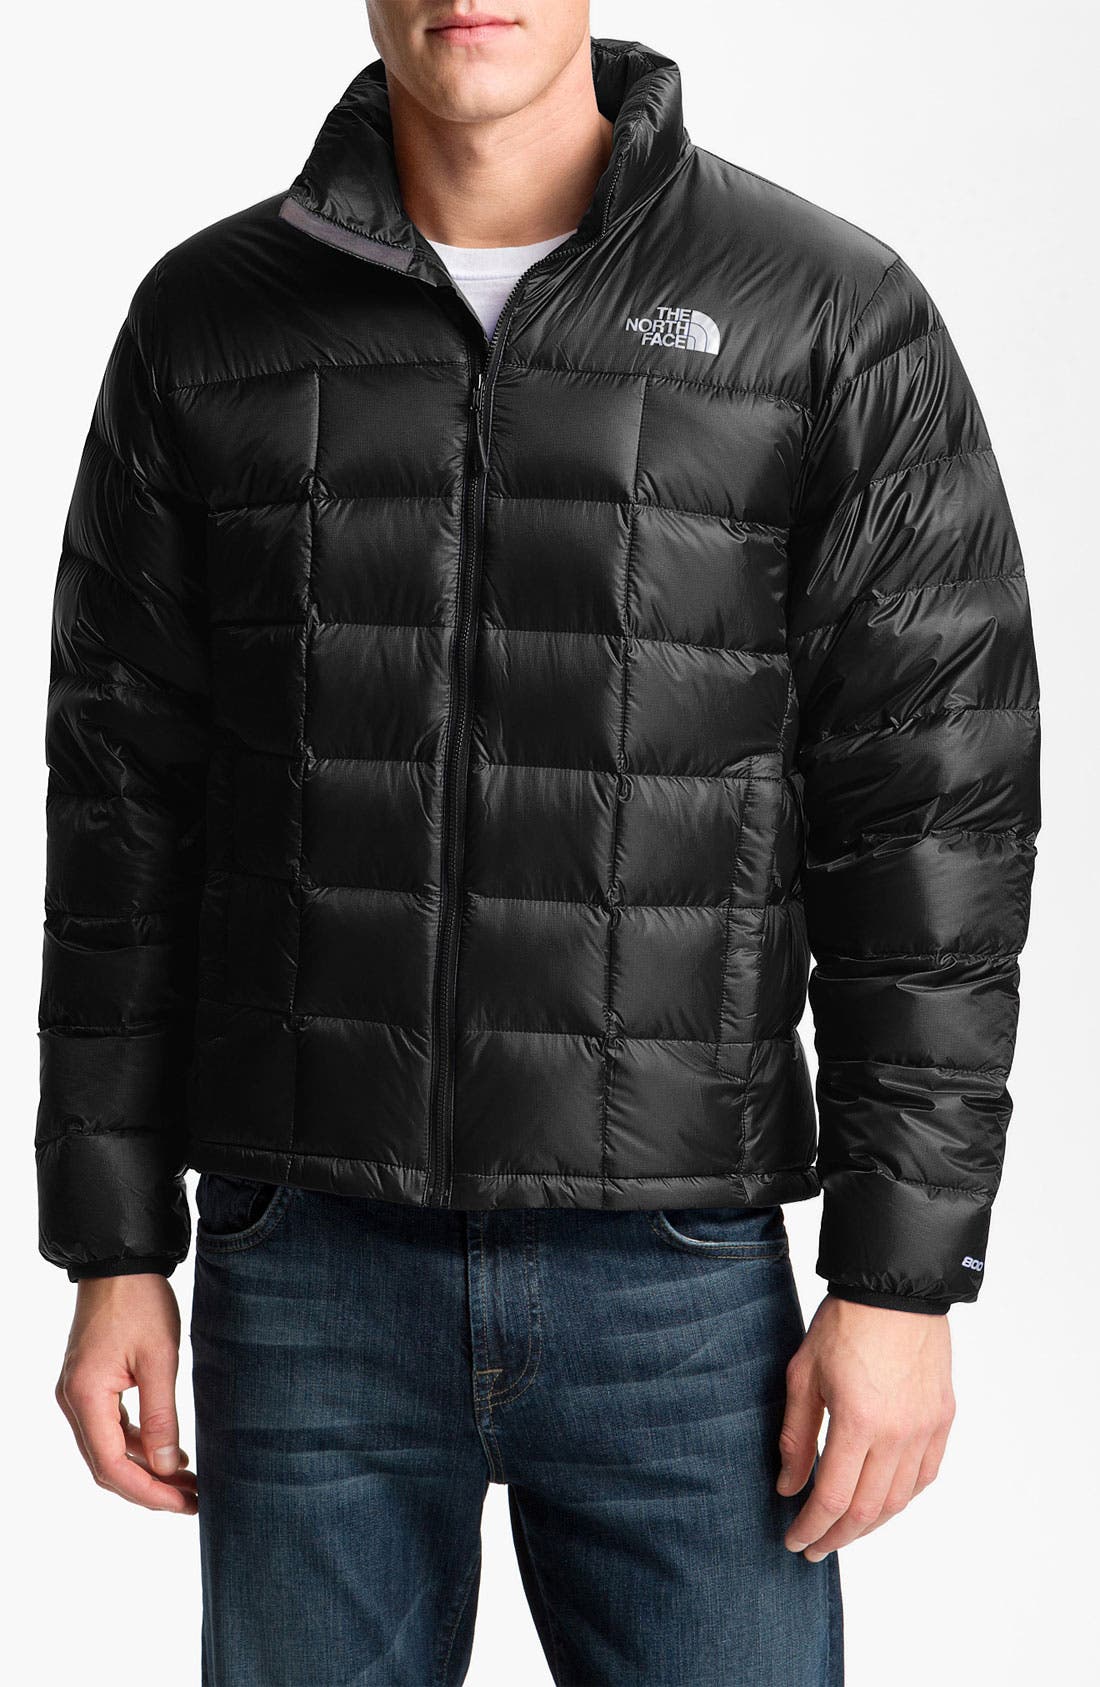 north face 800 fill down jacket